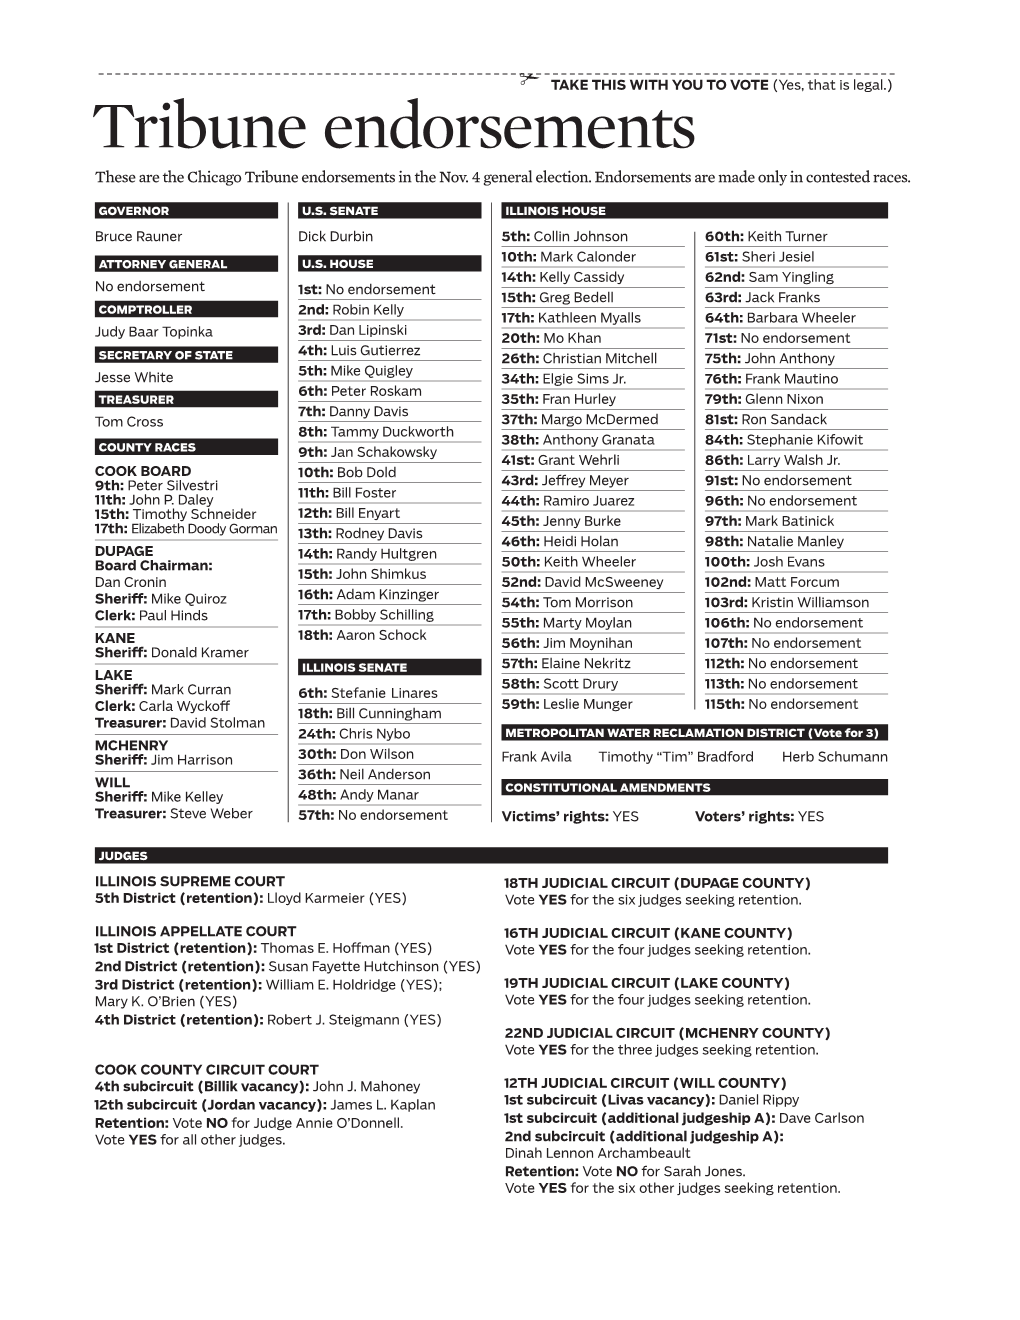 Tribune Endorsements These Are the Chicago Tribune Endorsements in the Nov